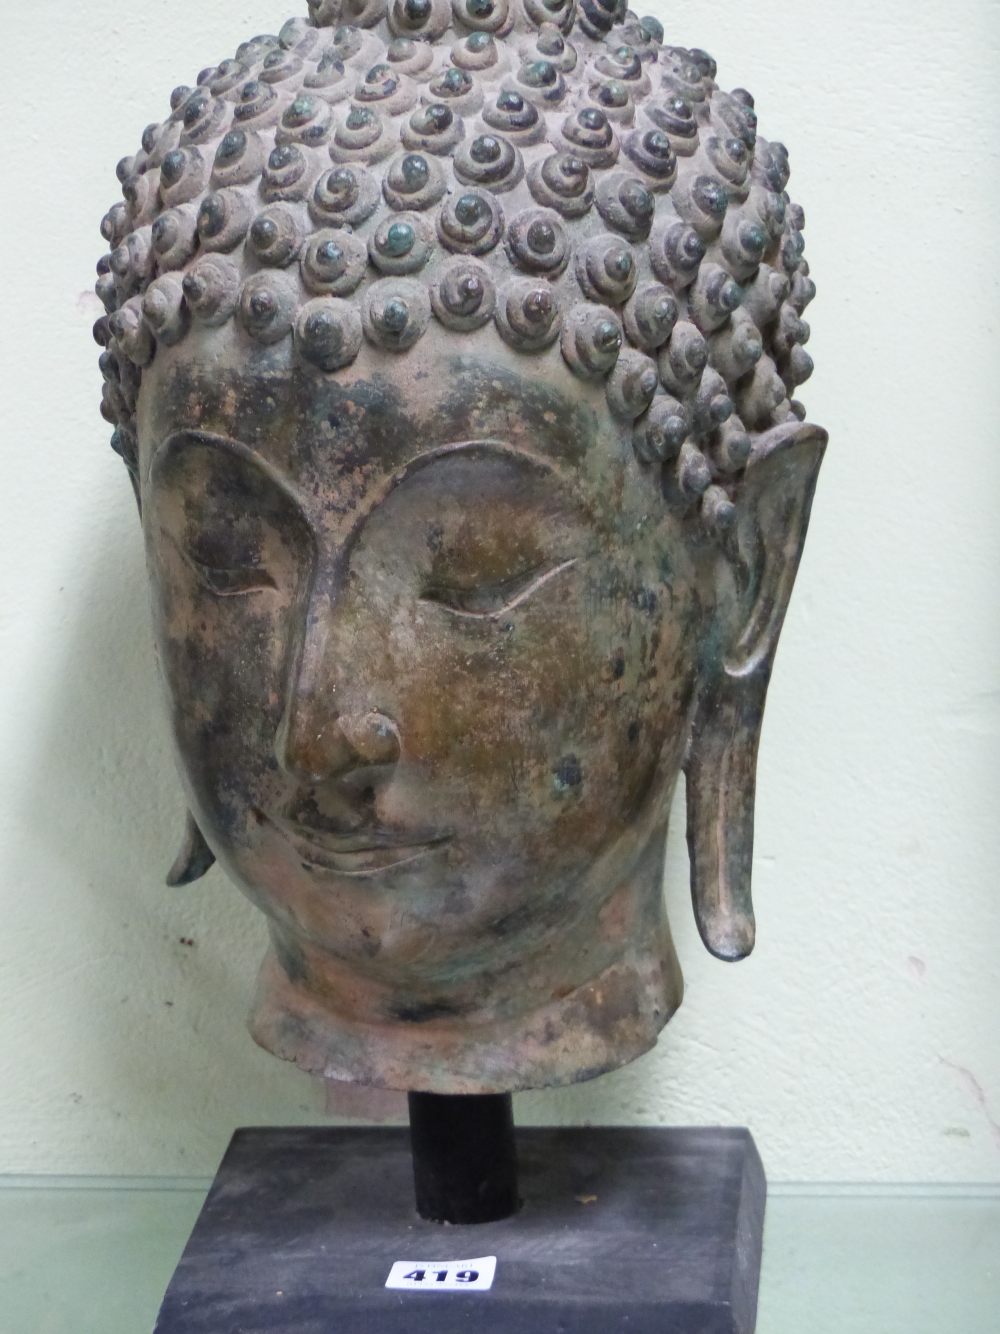 A THAI BRONZE HEAD OF THE BUDDHA, CURLED HAIR ABOVE HIS LONG LOBED EARS, HIS USNISA WITH FLAME - Image 2 of 10